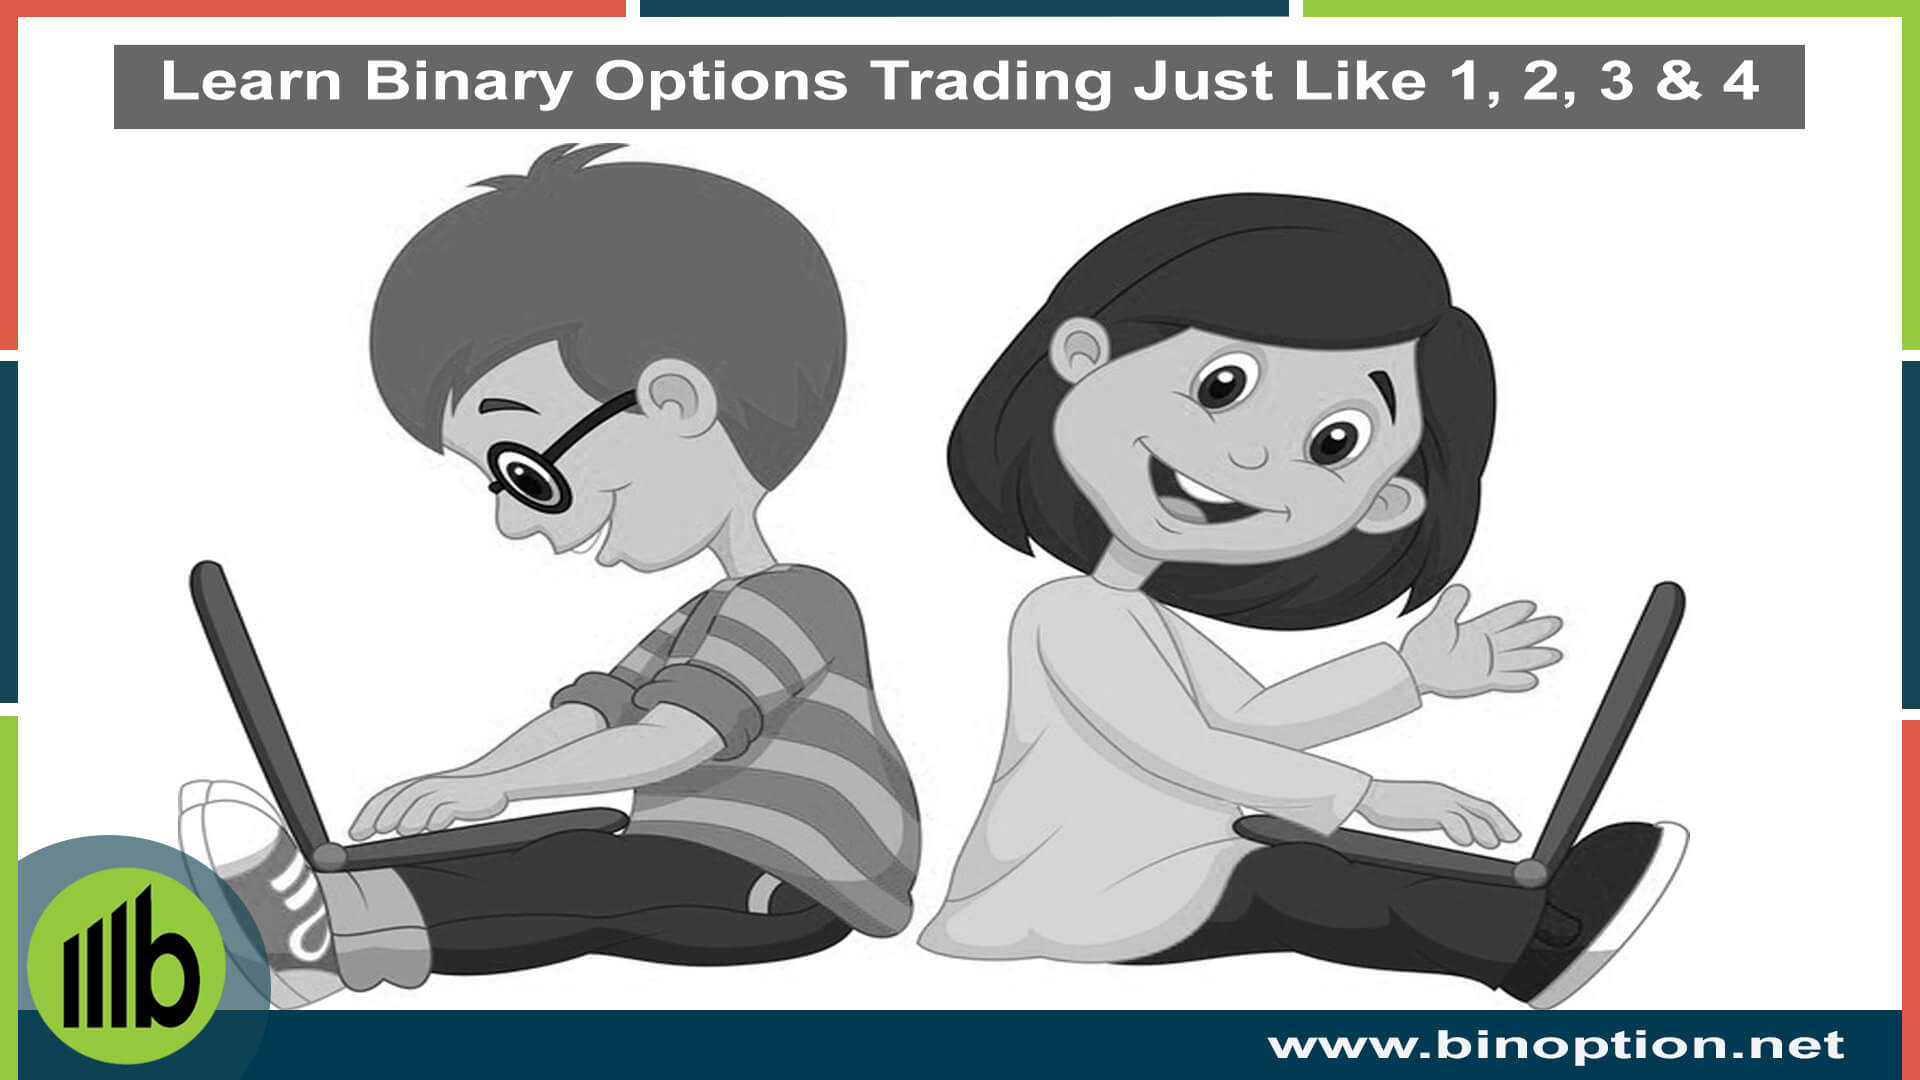 Learn more about binary options